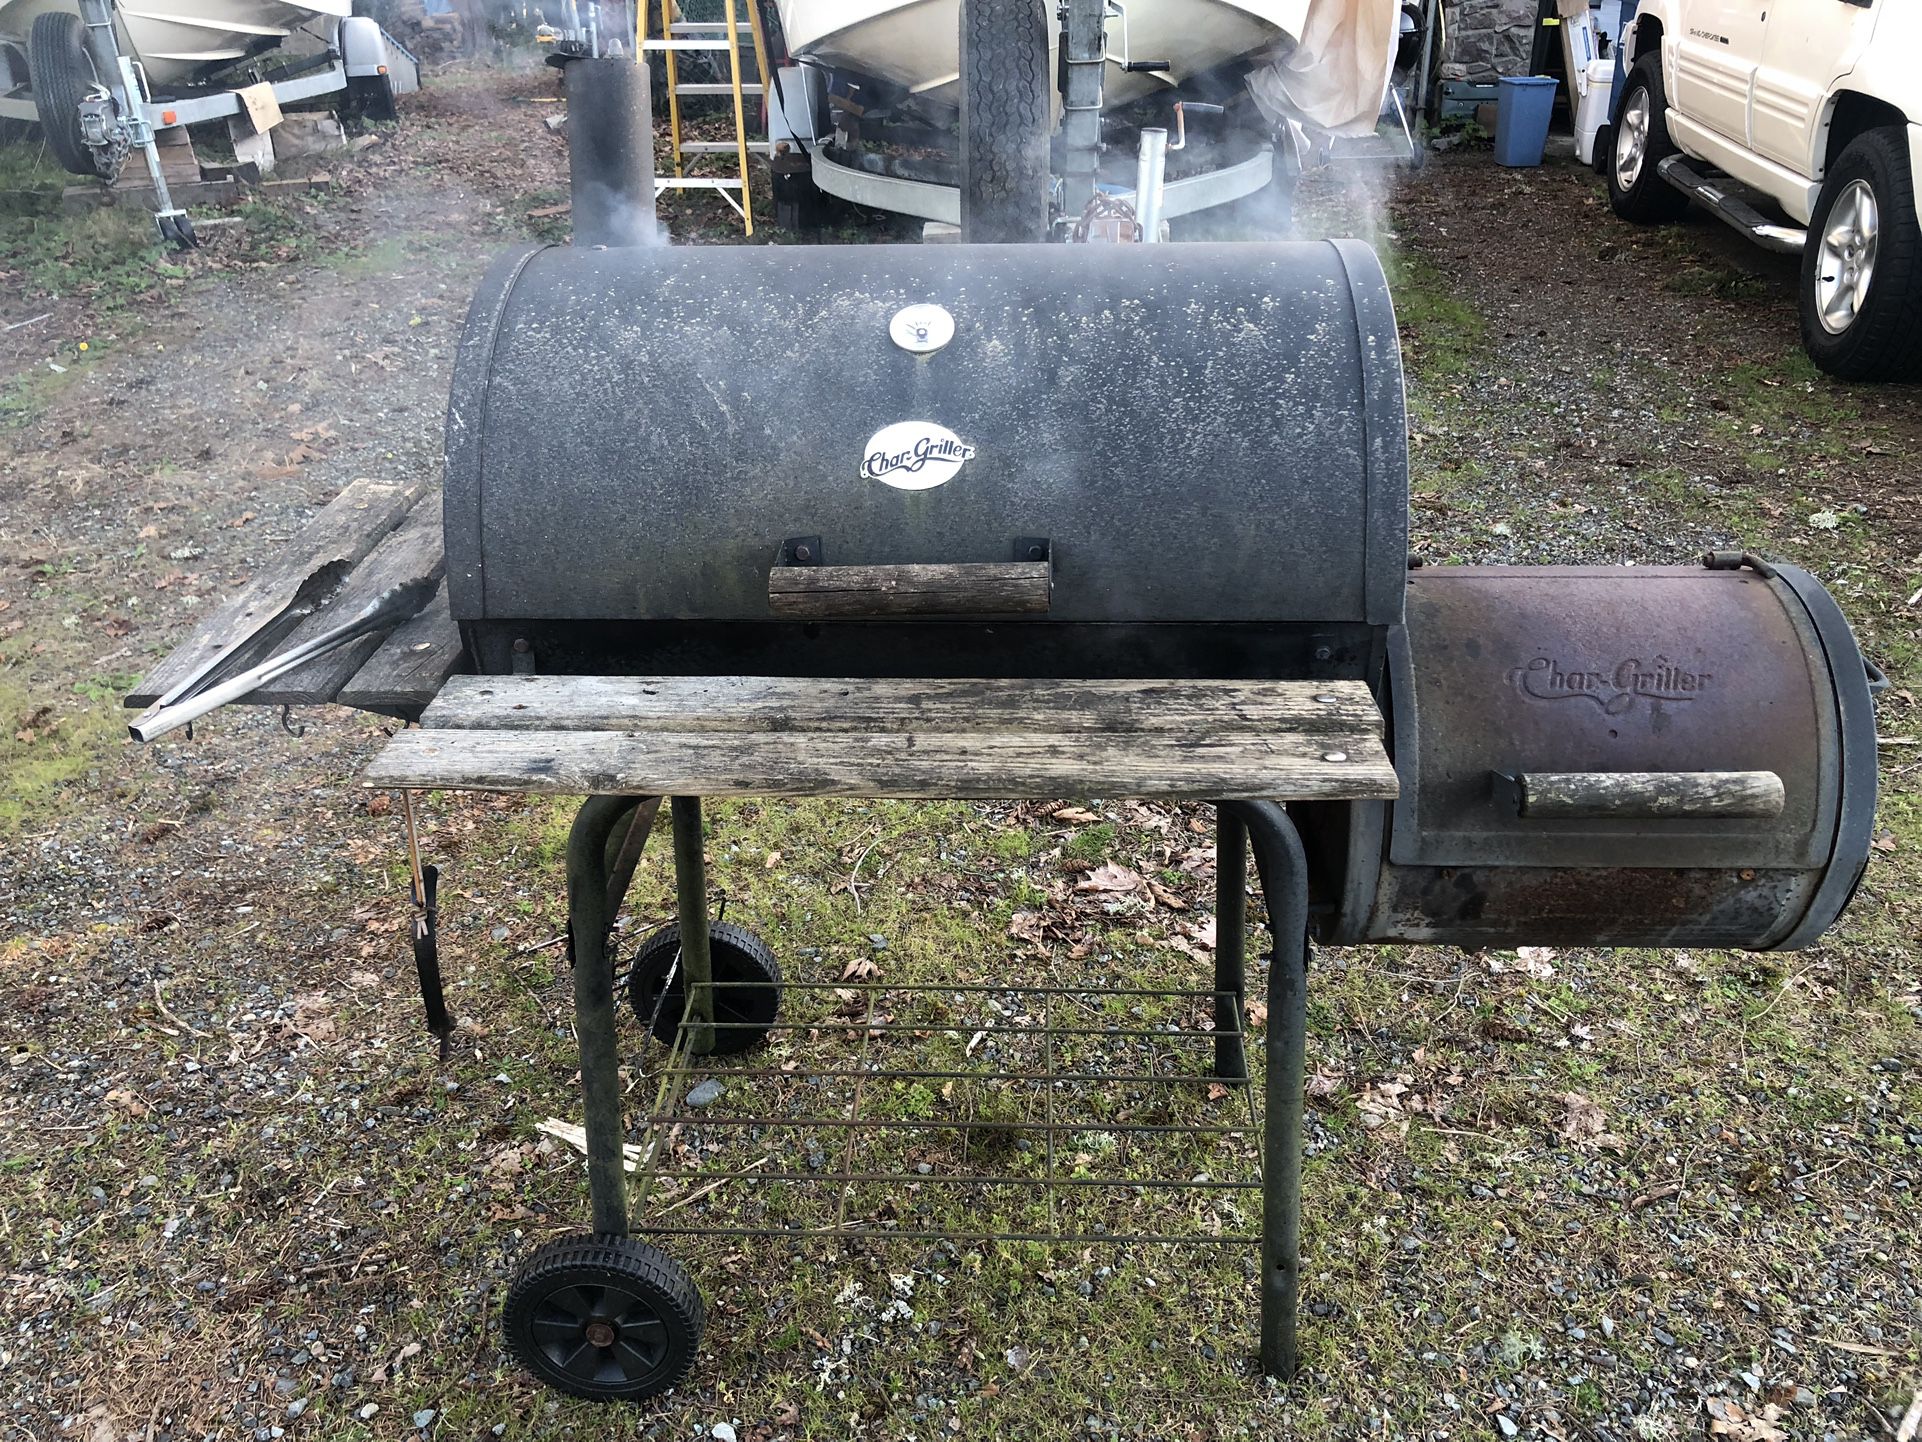 Char-Griller Deluxe Charcoal BBQ with side fire smoker box